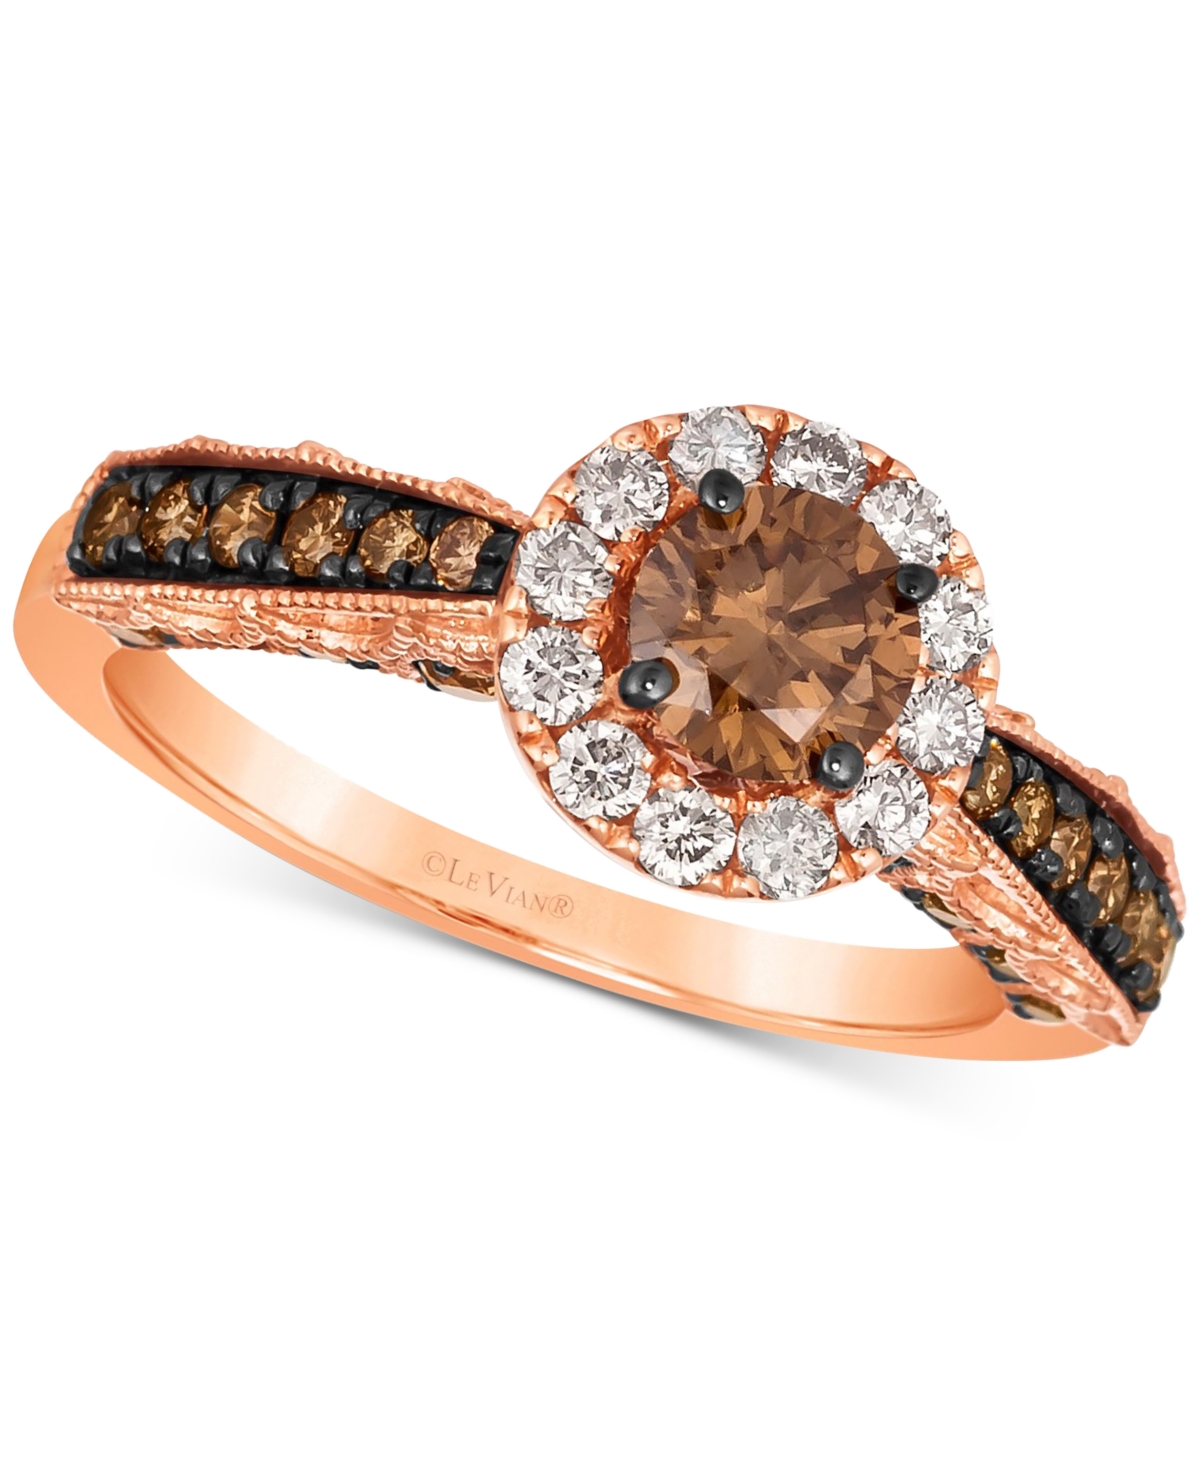 Le Vian Chocolate Diamond (1 Ct. T.w.) & Nude Diamond (1/4 Ct. T.w.) Halo Ring In 14k Rose Gold In K Strawberry Gold Ring